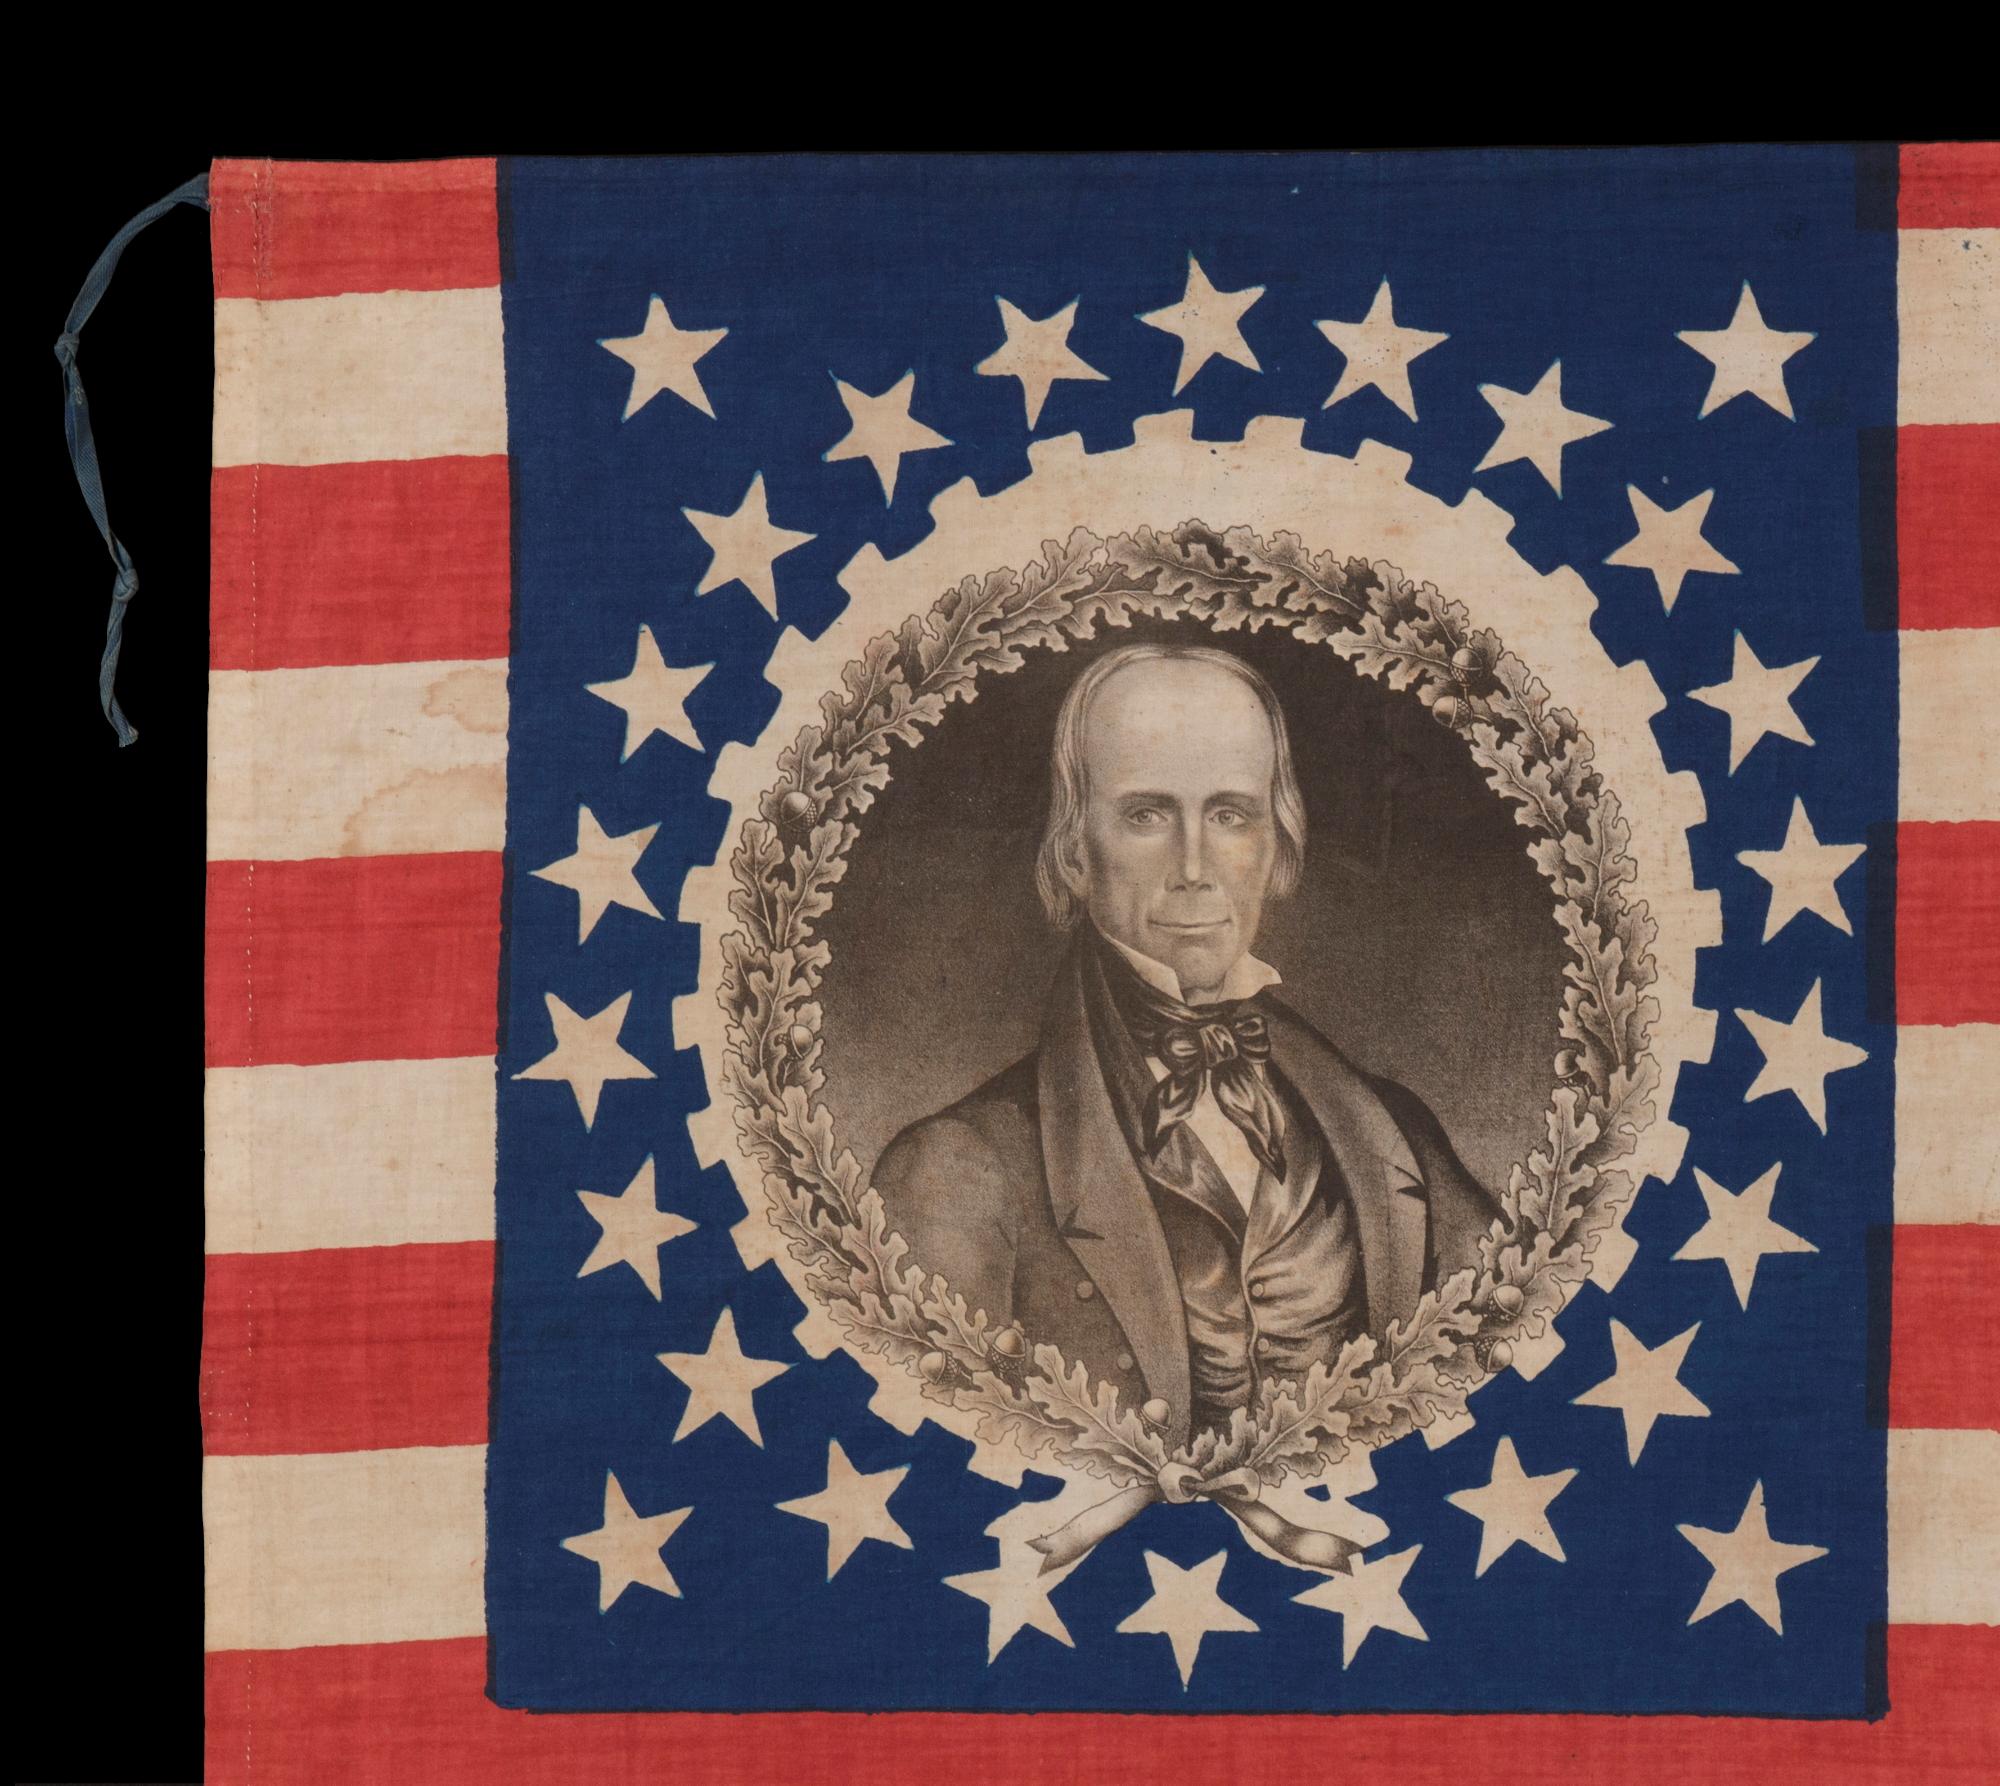 26 Star American Parade Flag, Made for the 1844 Presidential Campaign of Henry Clay and Theodore Freylinghuysen, with Clay’s Portrait Set Within an Oak Leaf & Gear Cog Medallion and the Rare Presence of Coattail Candidates Stockton &